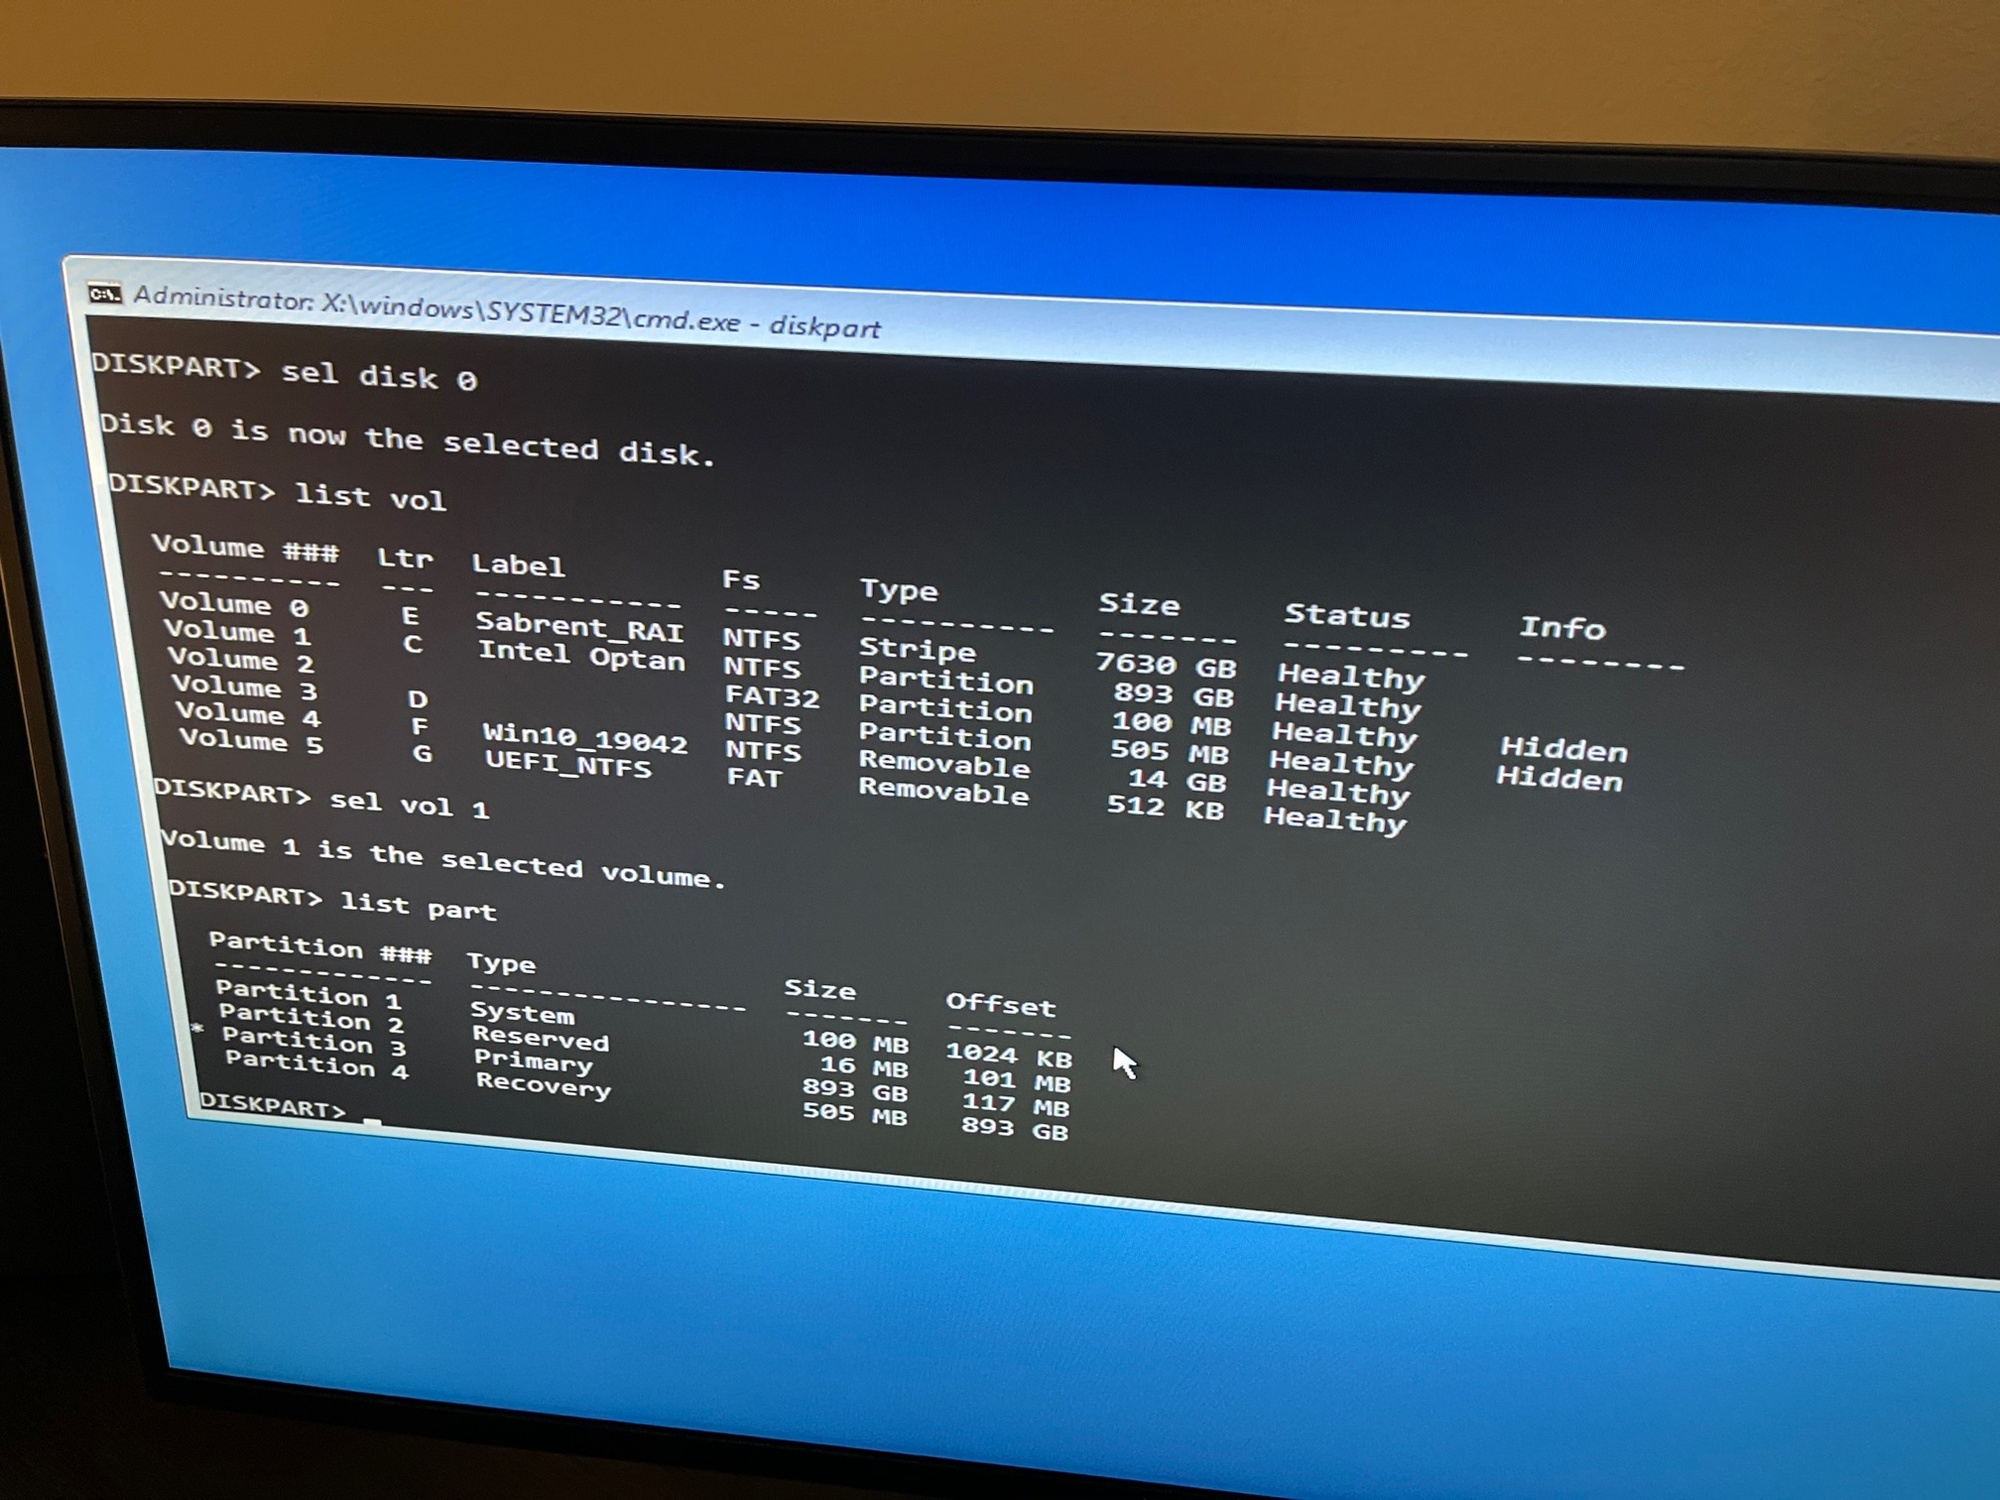 Cannot Boot to Windows 10 on Newly Cloned SSD - Stuck in Infinite Recovery Loop - Need Help! 118cf59d-e870-4828-8224-c4f6740a41fc?upload=true.jpg